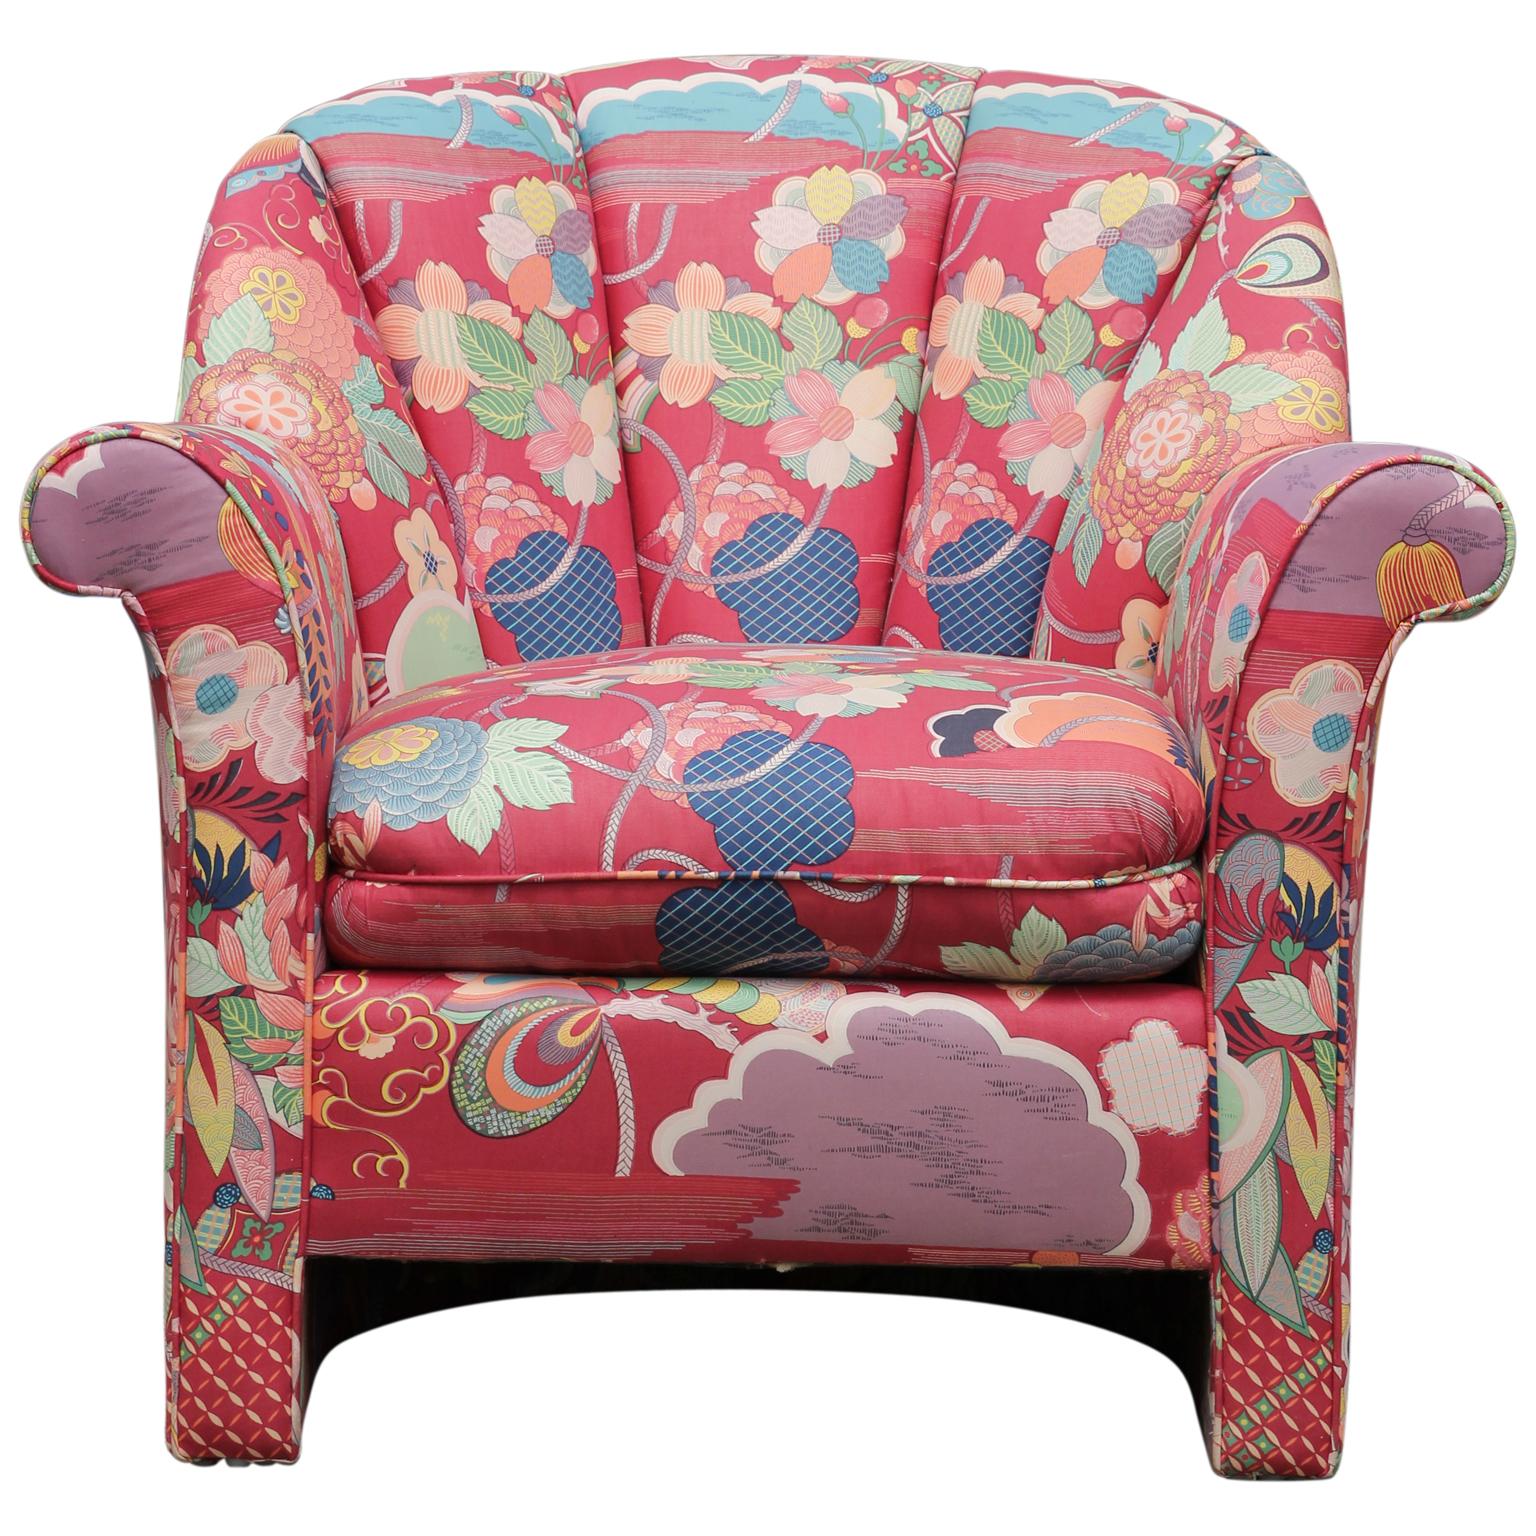 Pair of pink channel back chairs upholstered in pink colorful floral fabric. Under the cushion is a John Mascheroni for Swaim Originals.